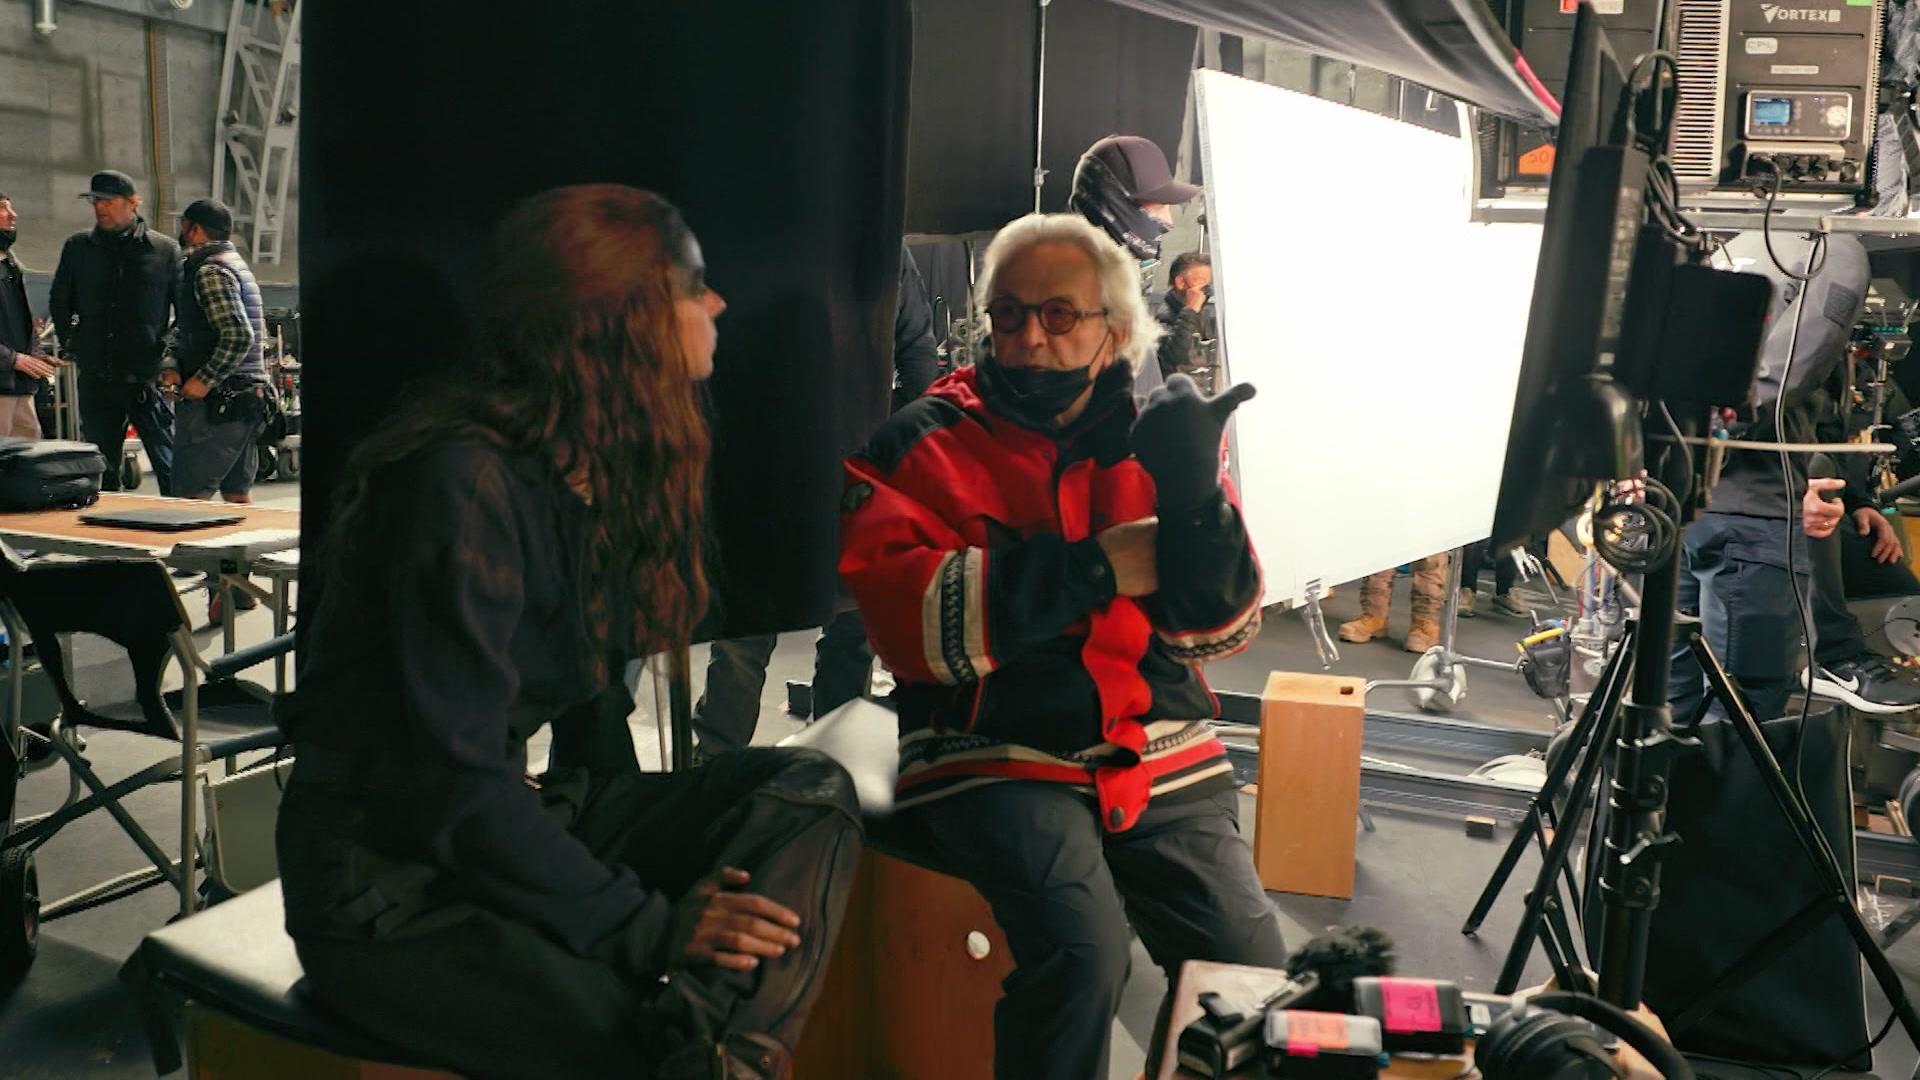 Director George Miller, wearing a red jacket, directs actor Anya Taylor-Joy on the set of Furiosa.